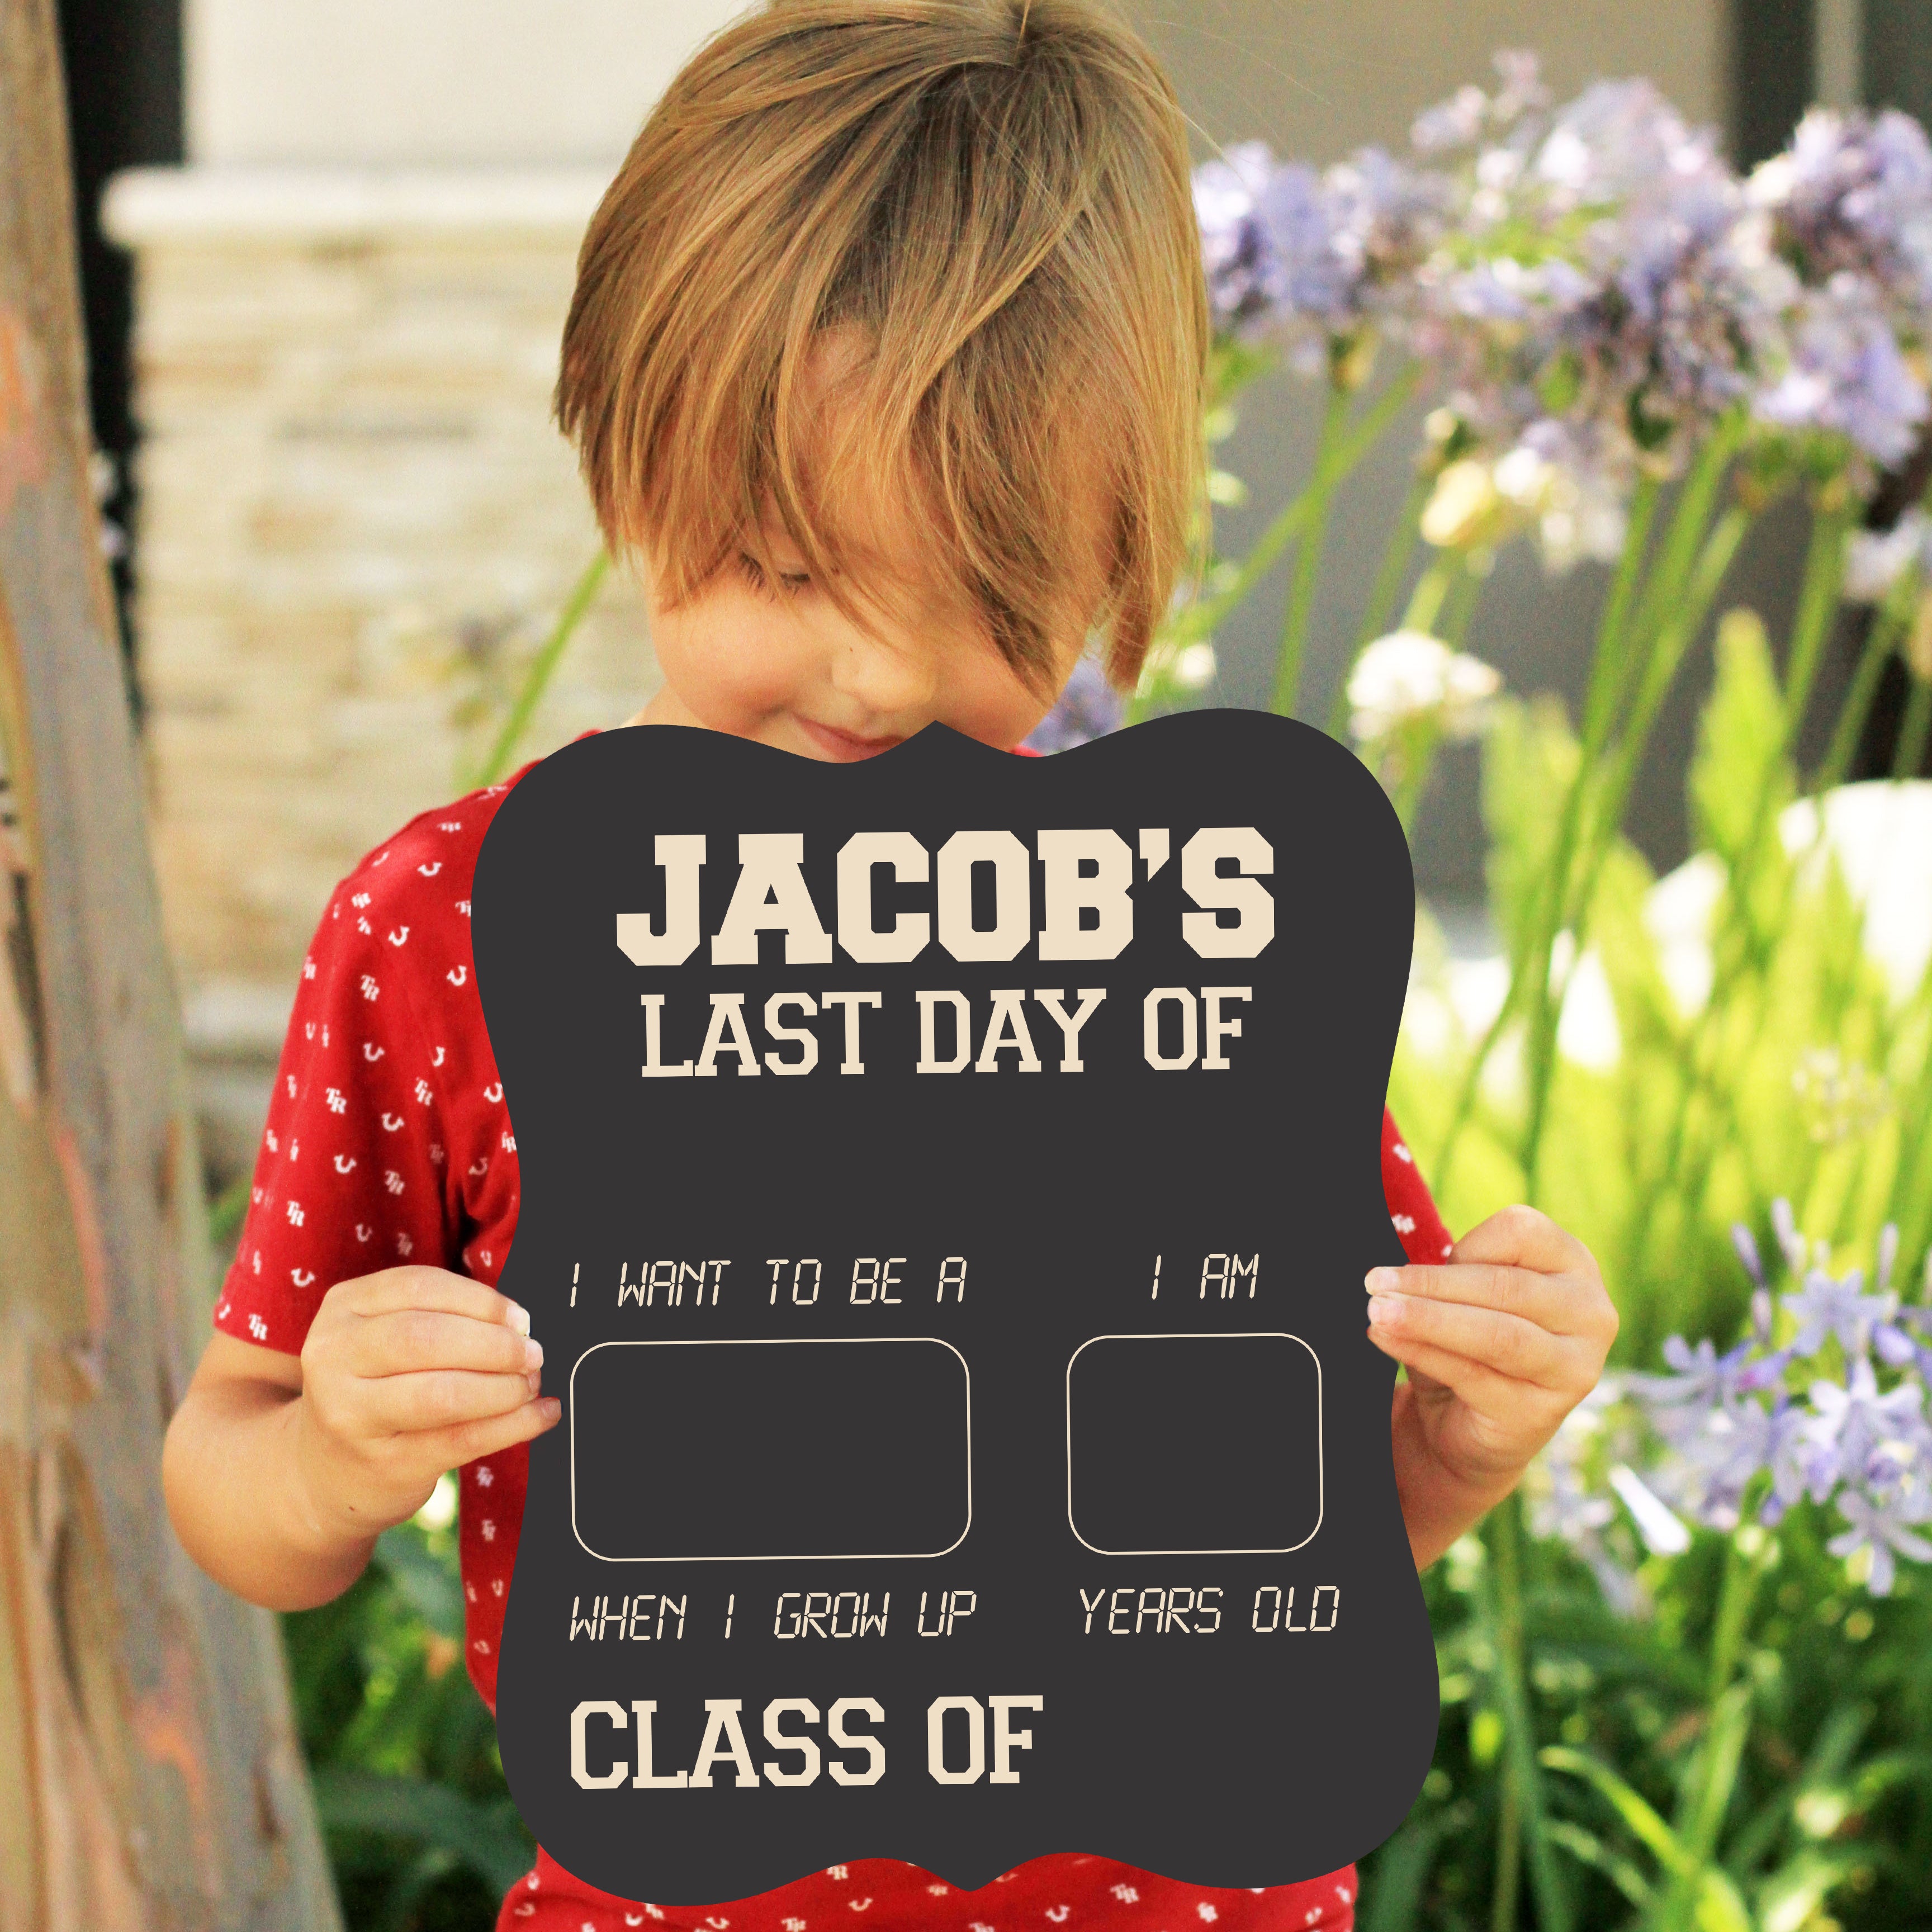 first-last-day-of-school-chalkboard-sign-jacob-stamp-out